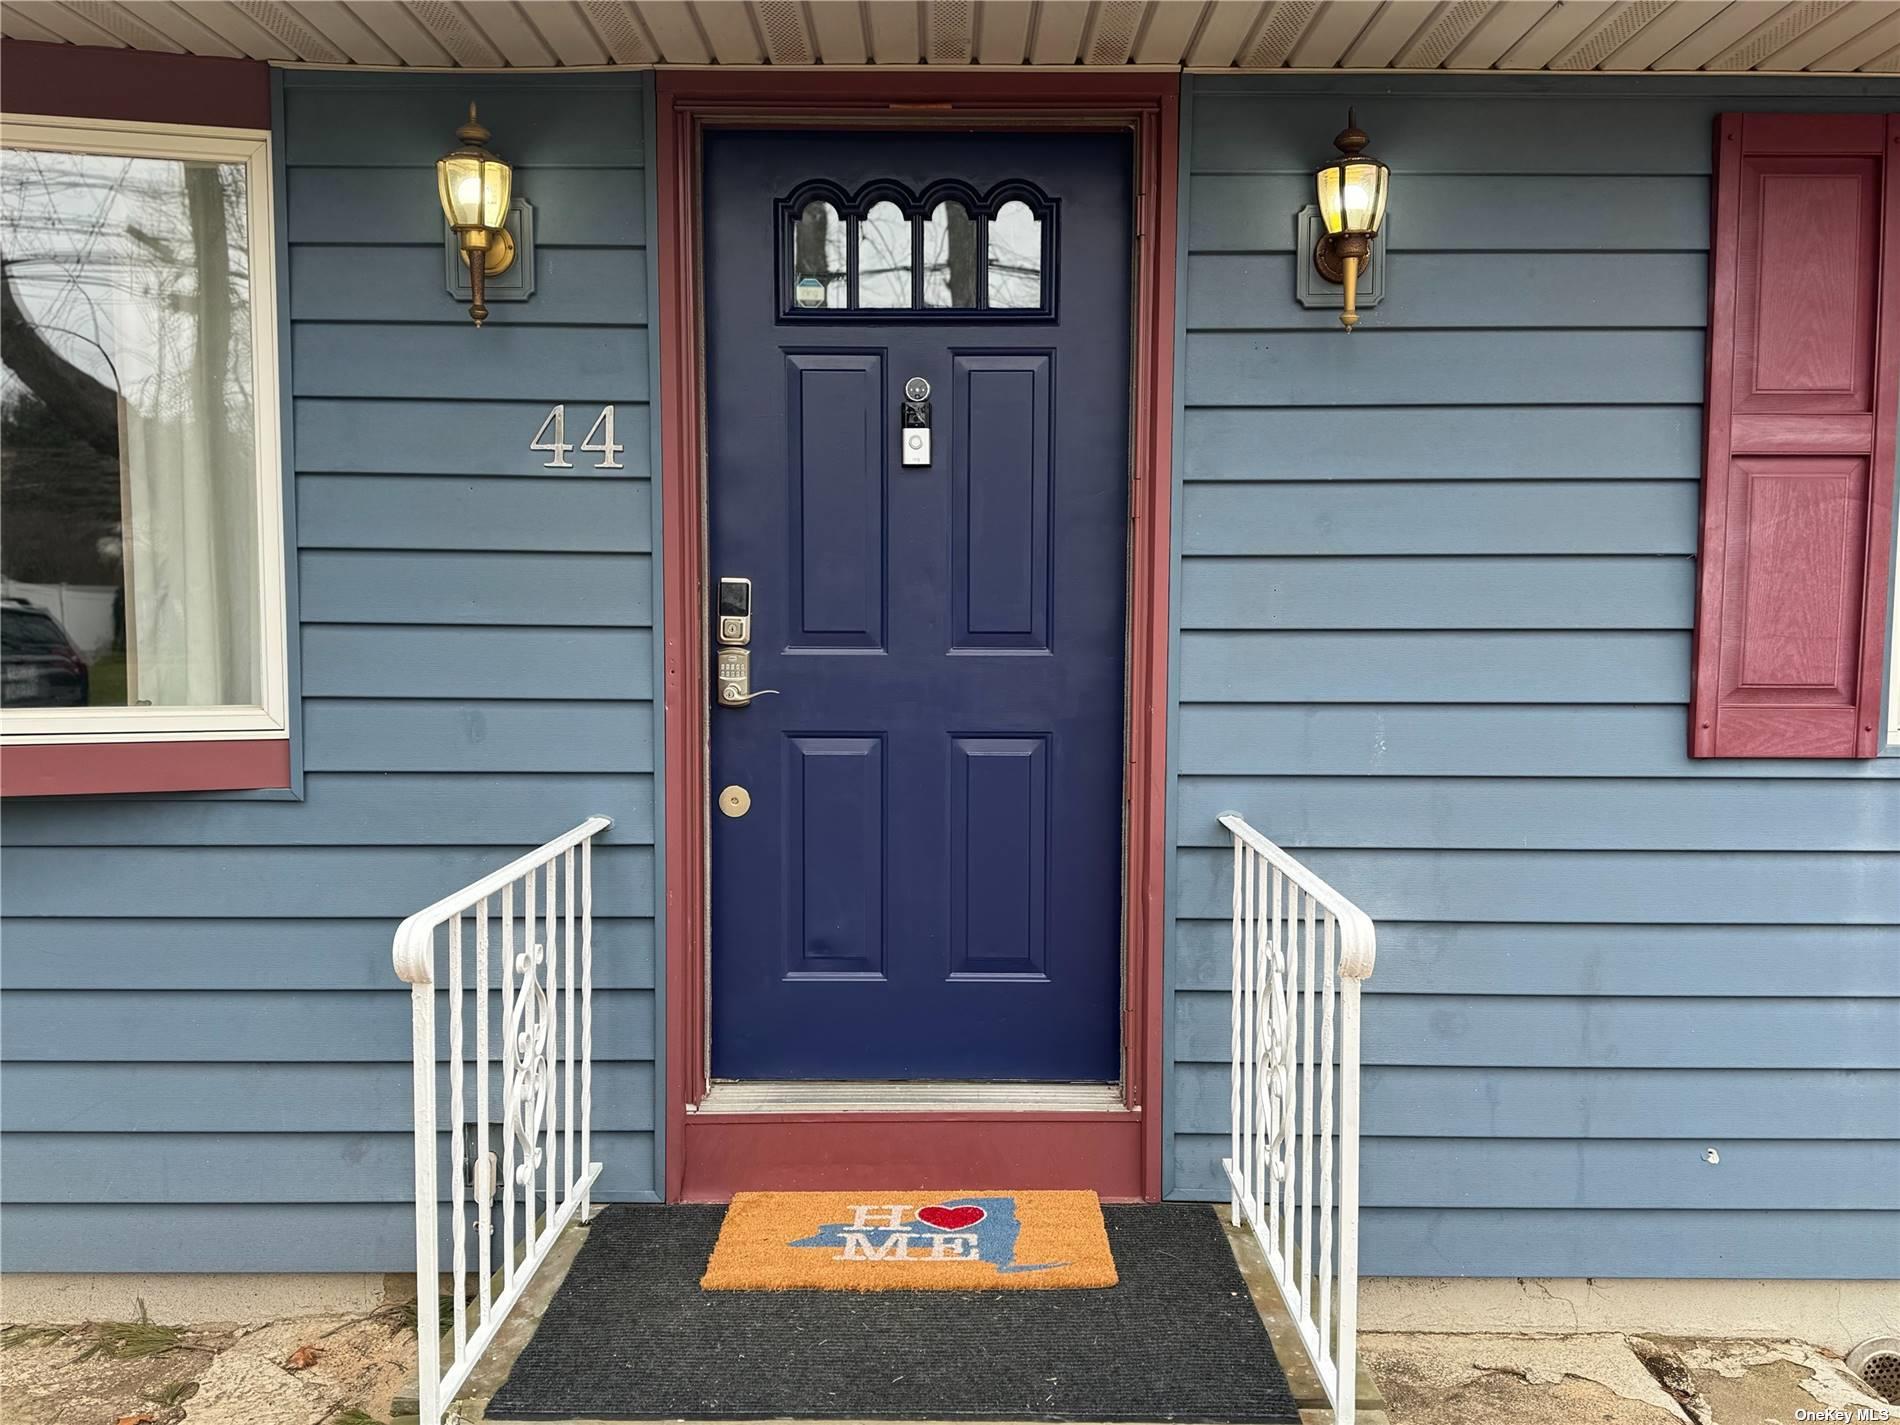 a view of an entryway door front of house